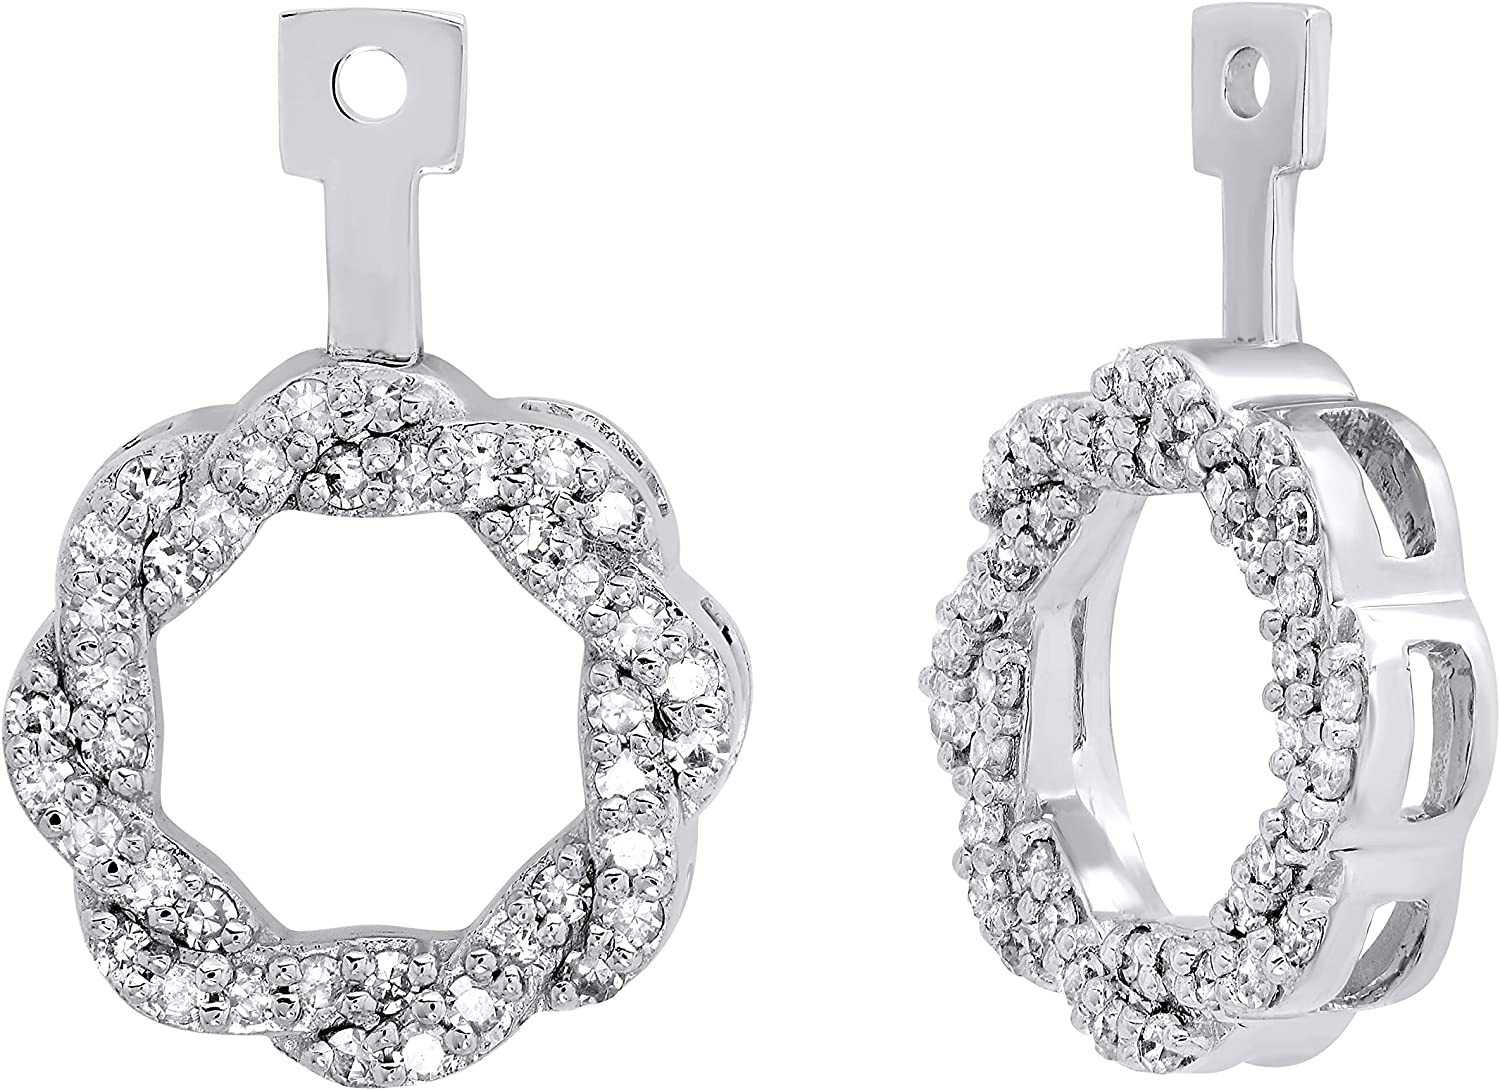 Dazzlingrock Collection 0.45 Carat (Ctw) Round White Diamond Ladies Swirl Earring Jackets 1/2 CT, Available in 10K/14K/18K Gold